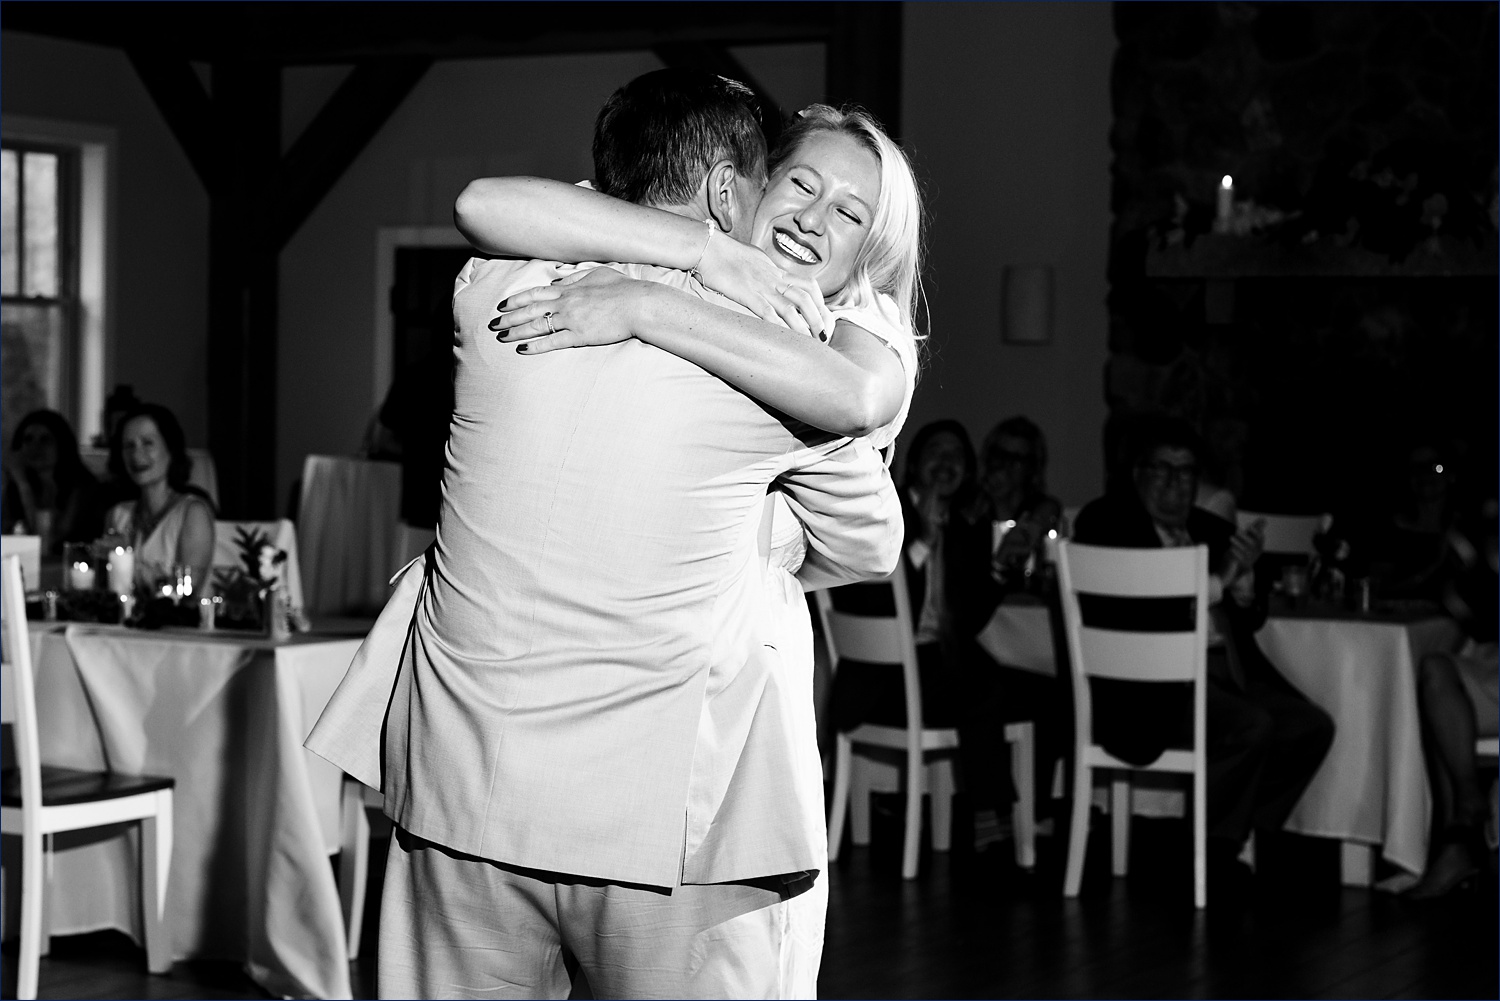 The bride embraces her dad during the wedding reception